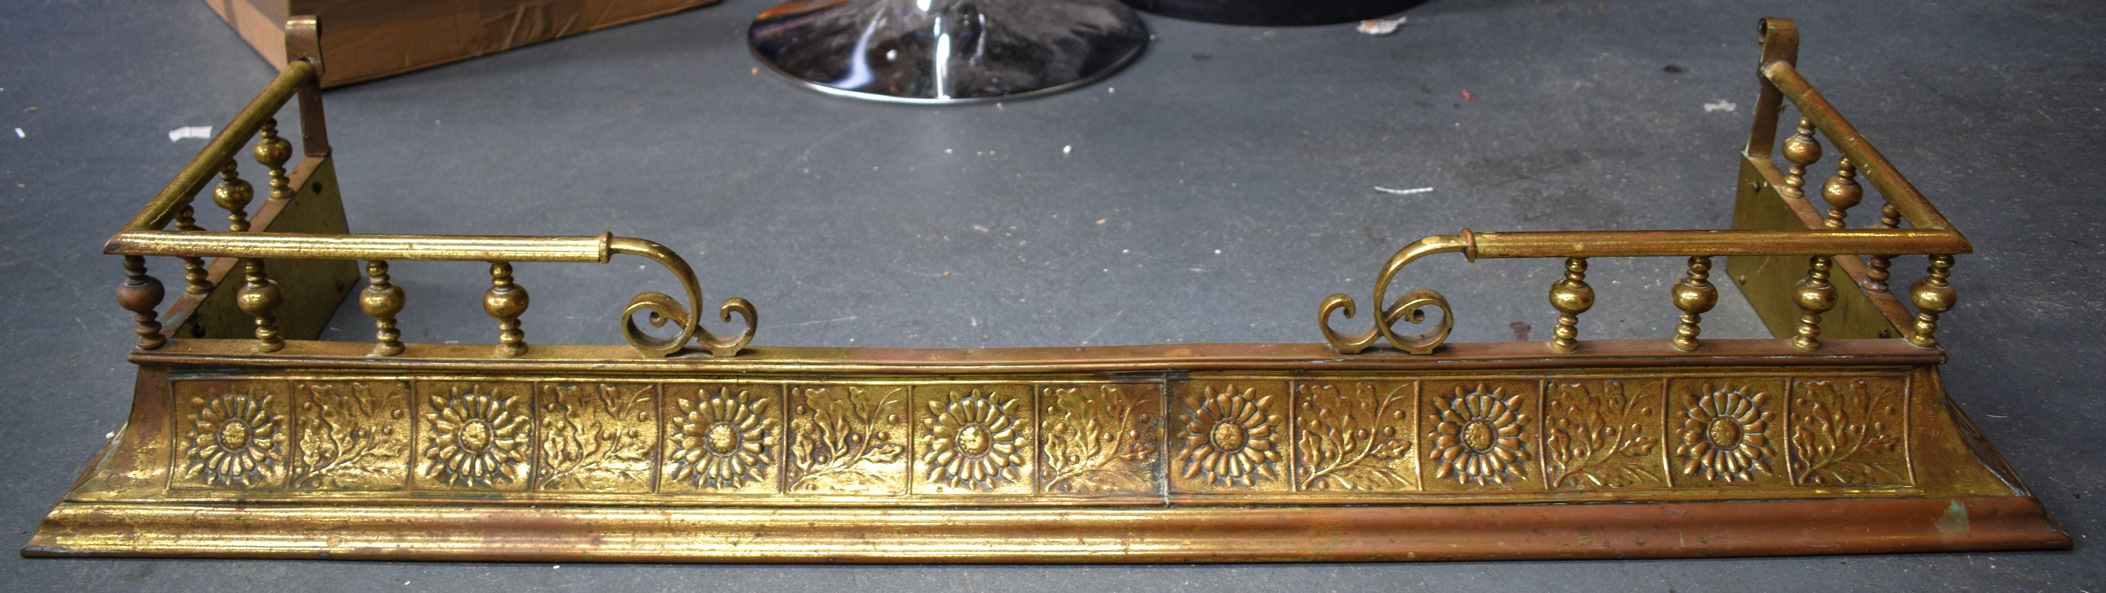 AN EARLY 20TH CENTURY ARTS AND CRAFTS COPPER AND BRASS FENDER, decorated with panels of flowers,